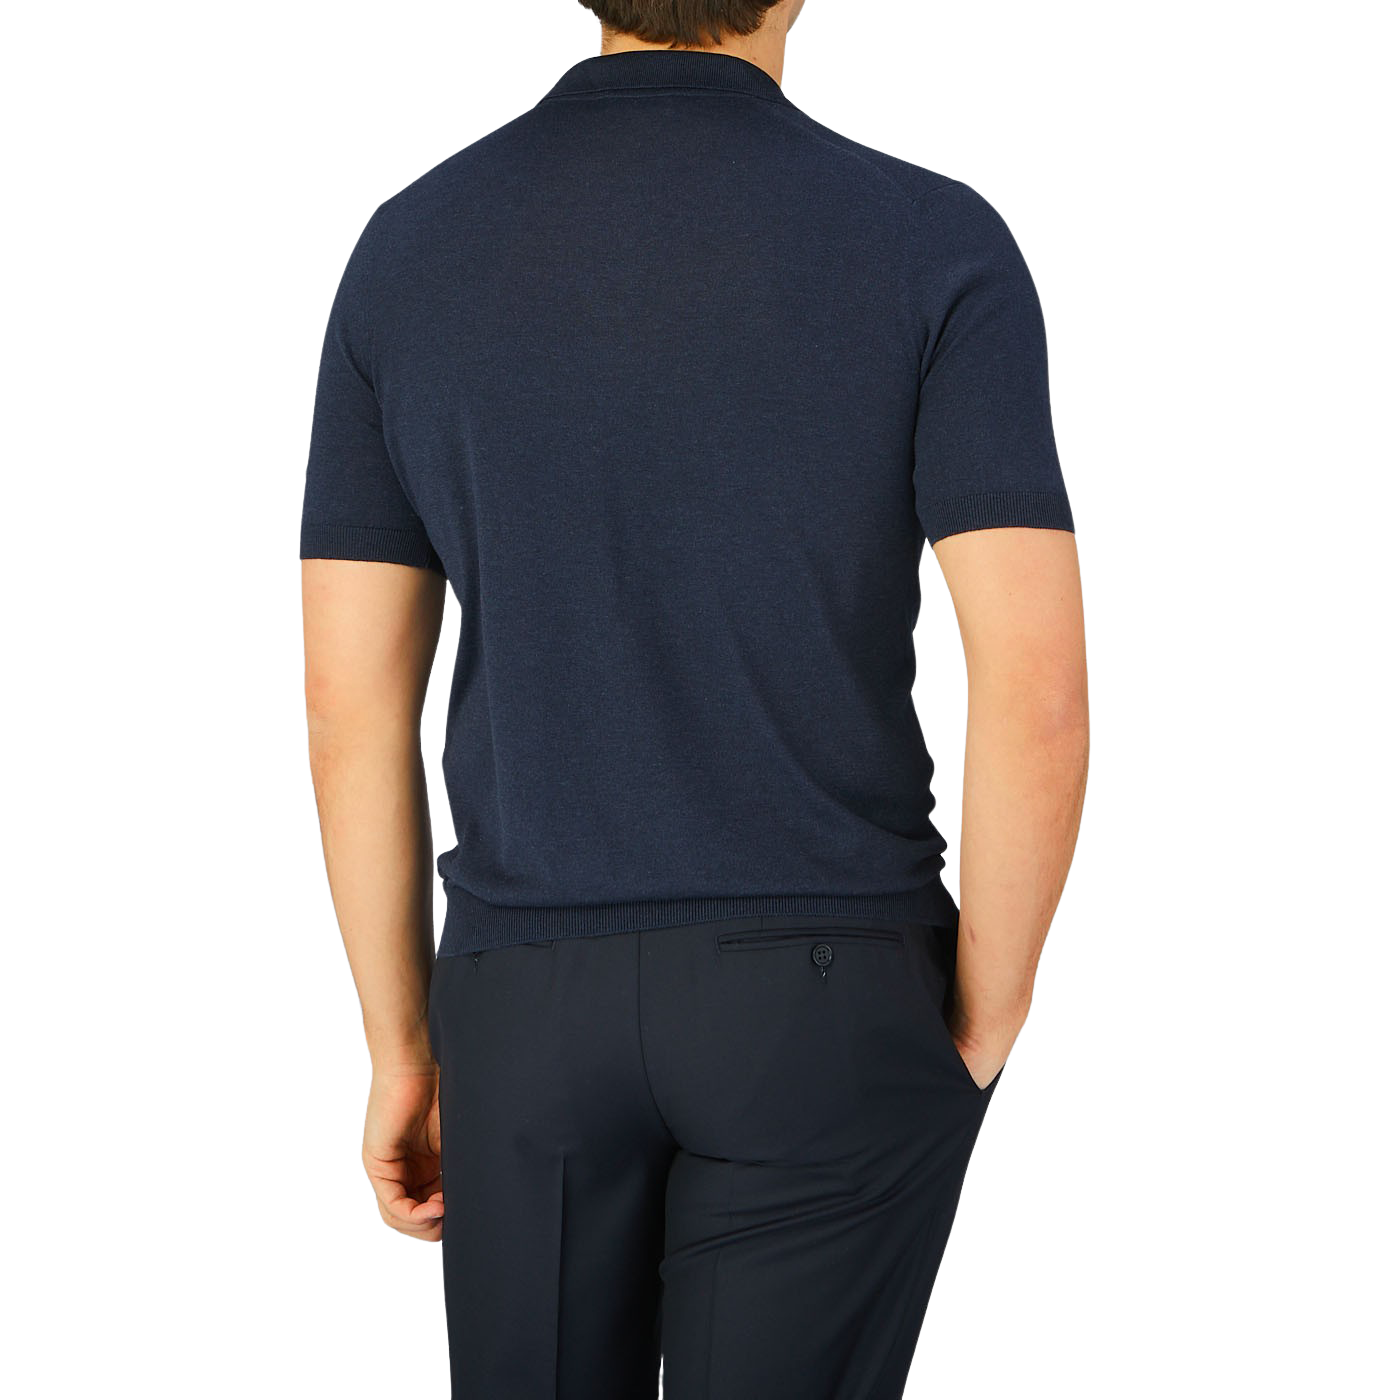 The back view of a man wearing a Gran Sasso Navy Blue Knitted Silk Polo Shirt.